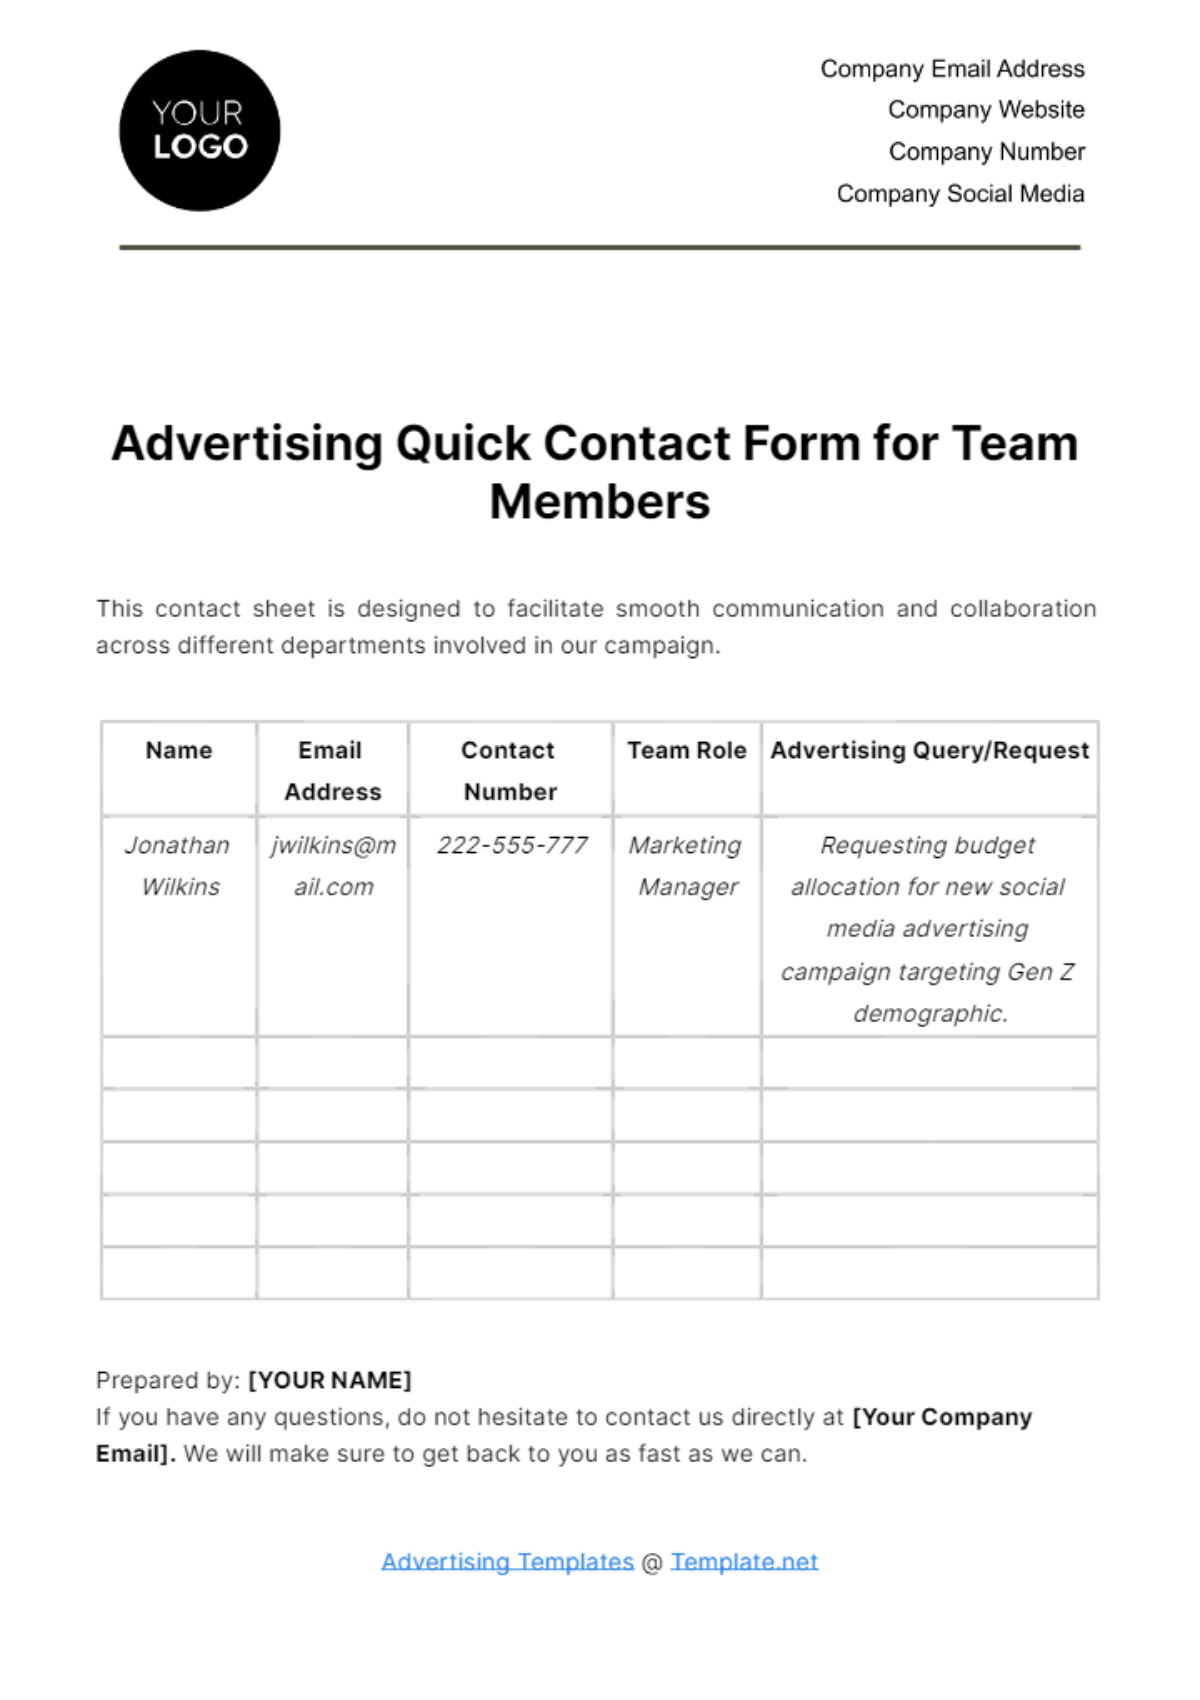 Free Advertising Quick Contact Form for Team Members Template